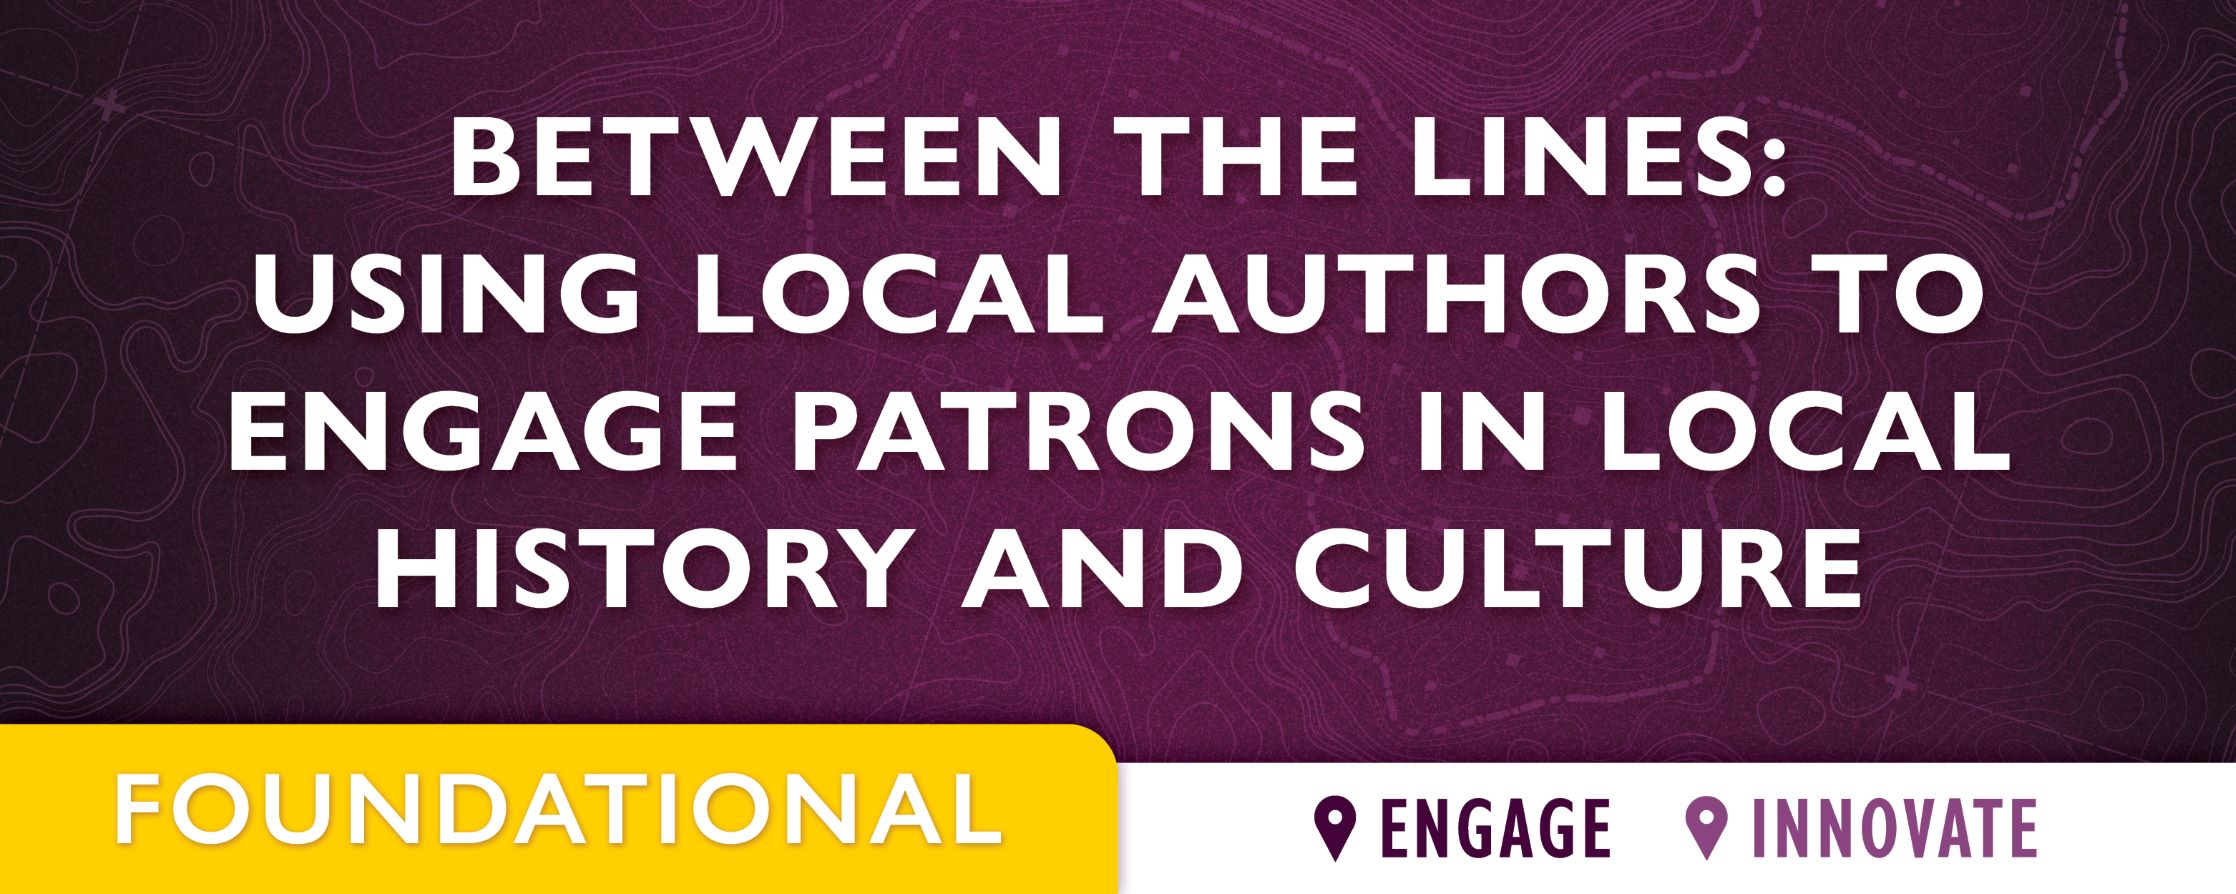 purple background with text: Between the Lines: Using Local Authors to Engage Patrons in Local History and Culture 